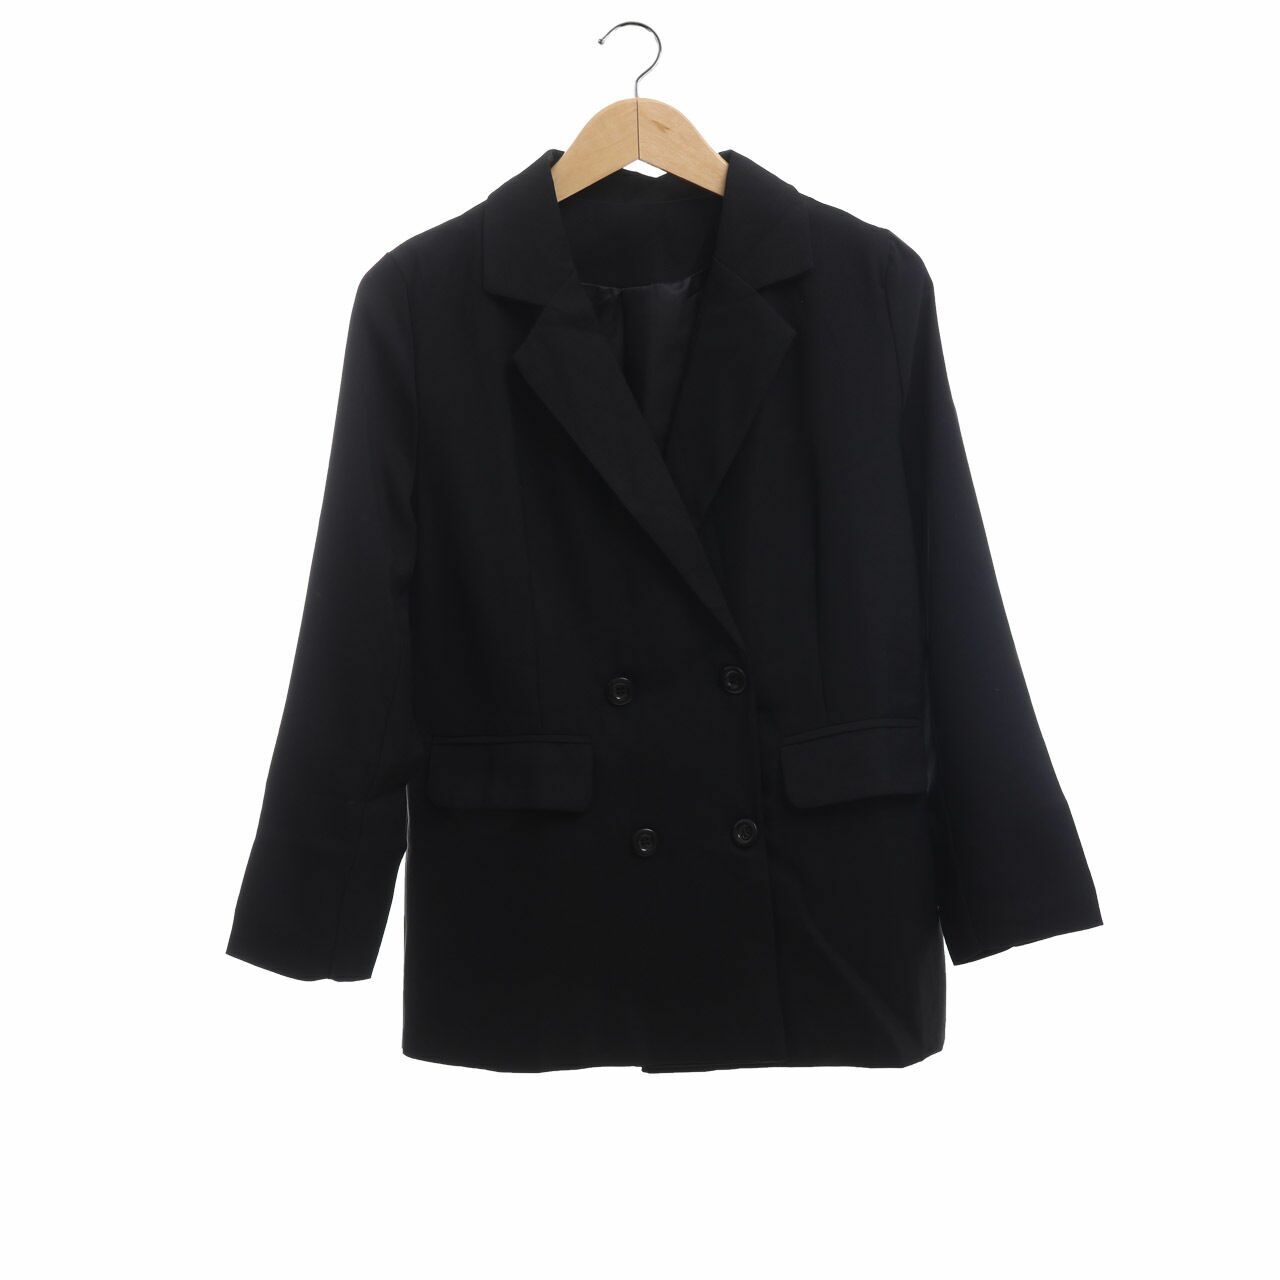 Day by Love and Flair Black Oversized Blazer